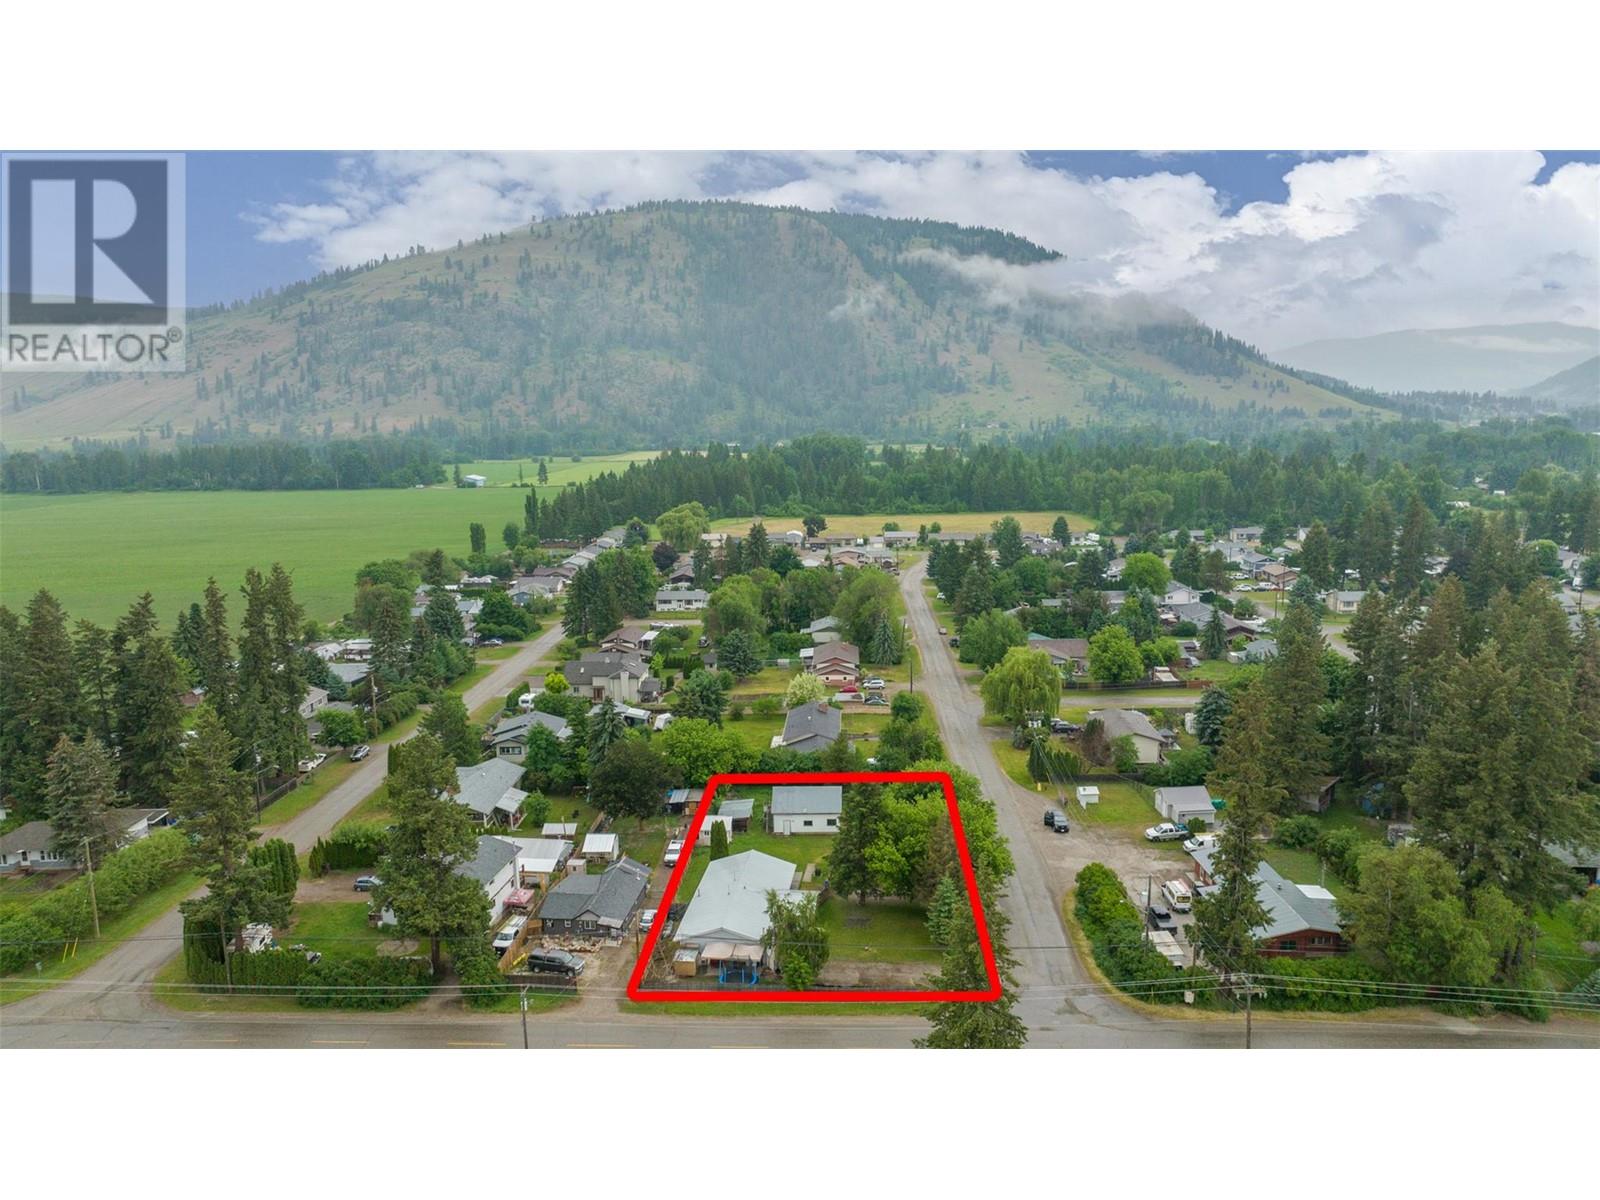 702 - 704 & Franklyn Road, Lumby Valley, Lumby 